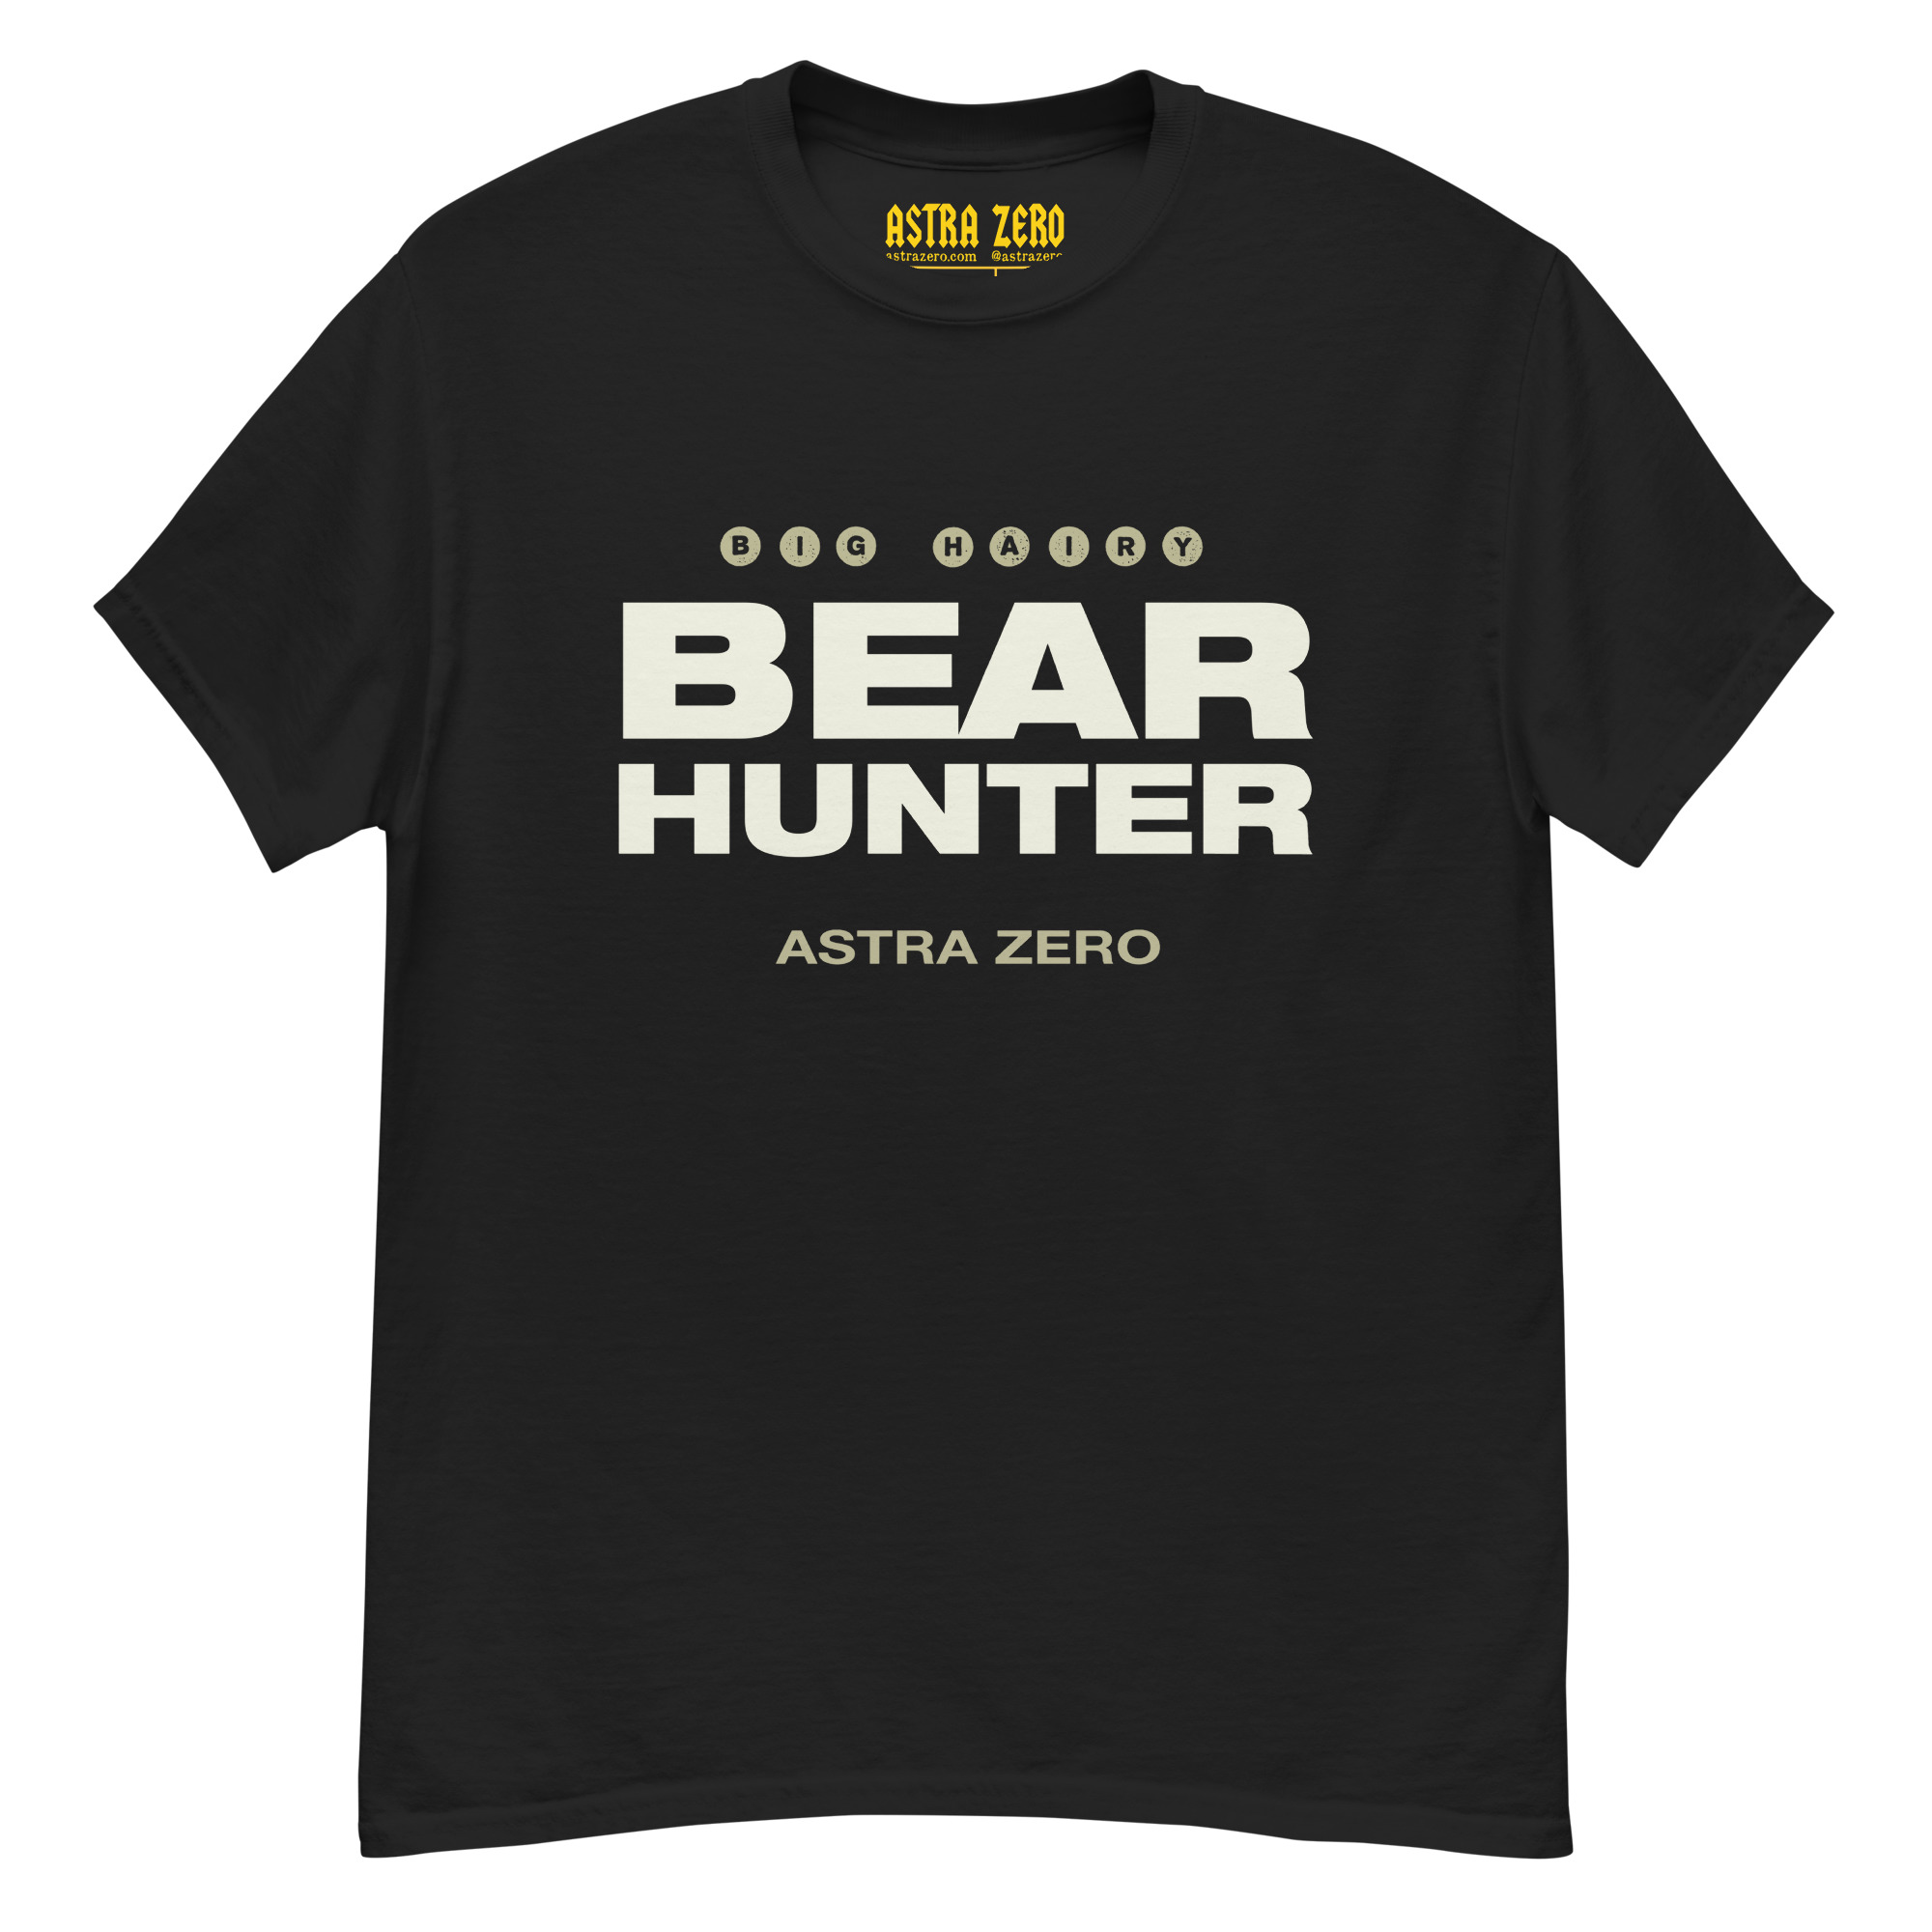 Featured image for “Bear Hunter - Men's classic tee”